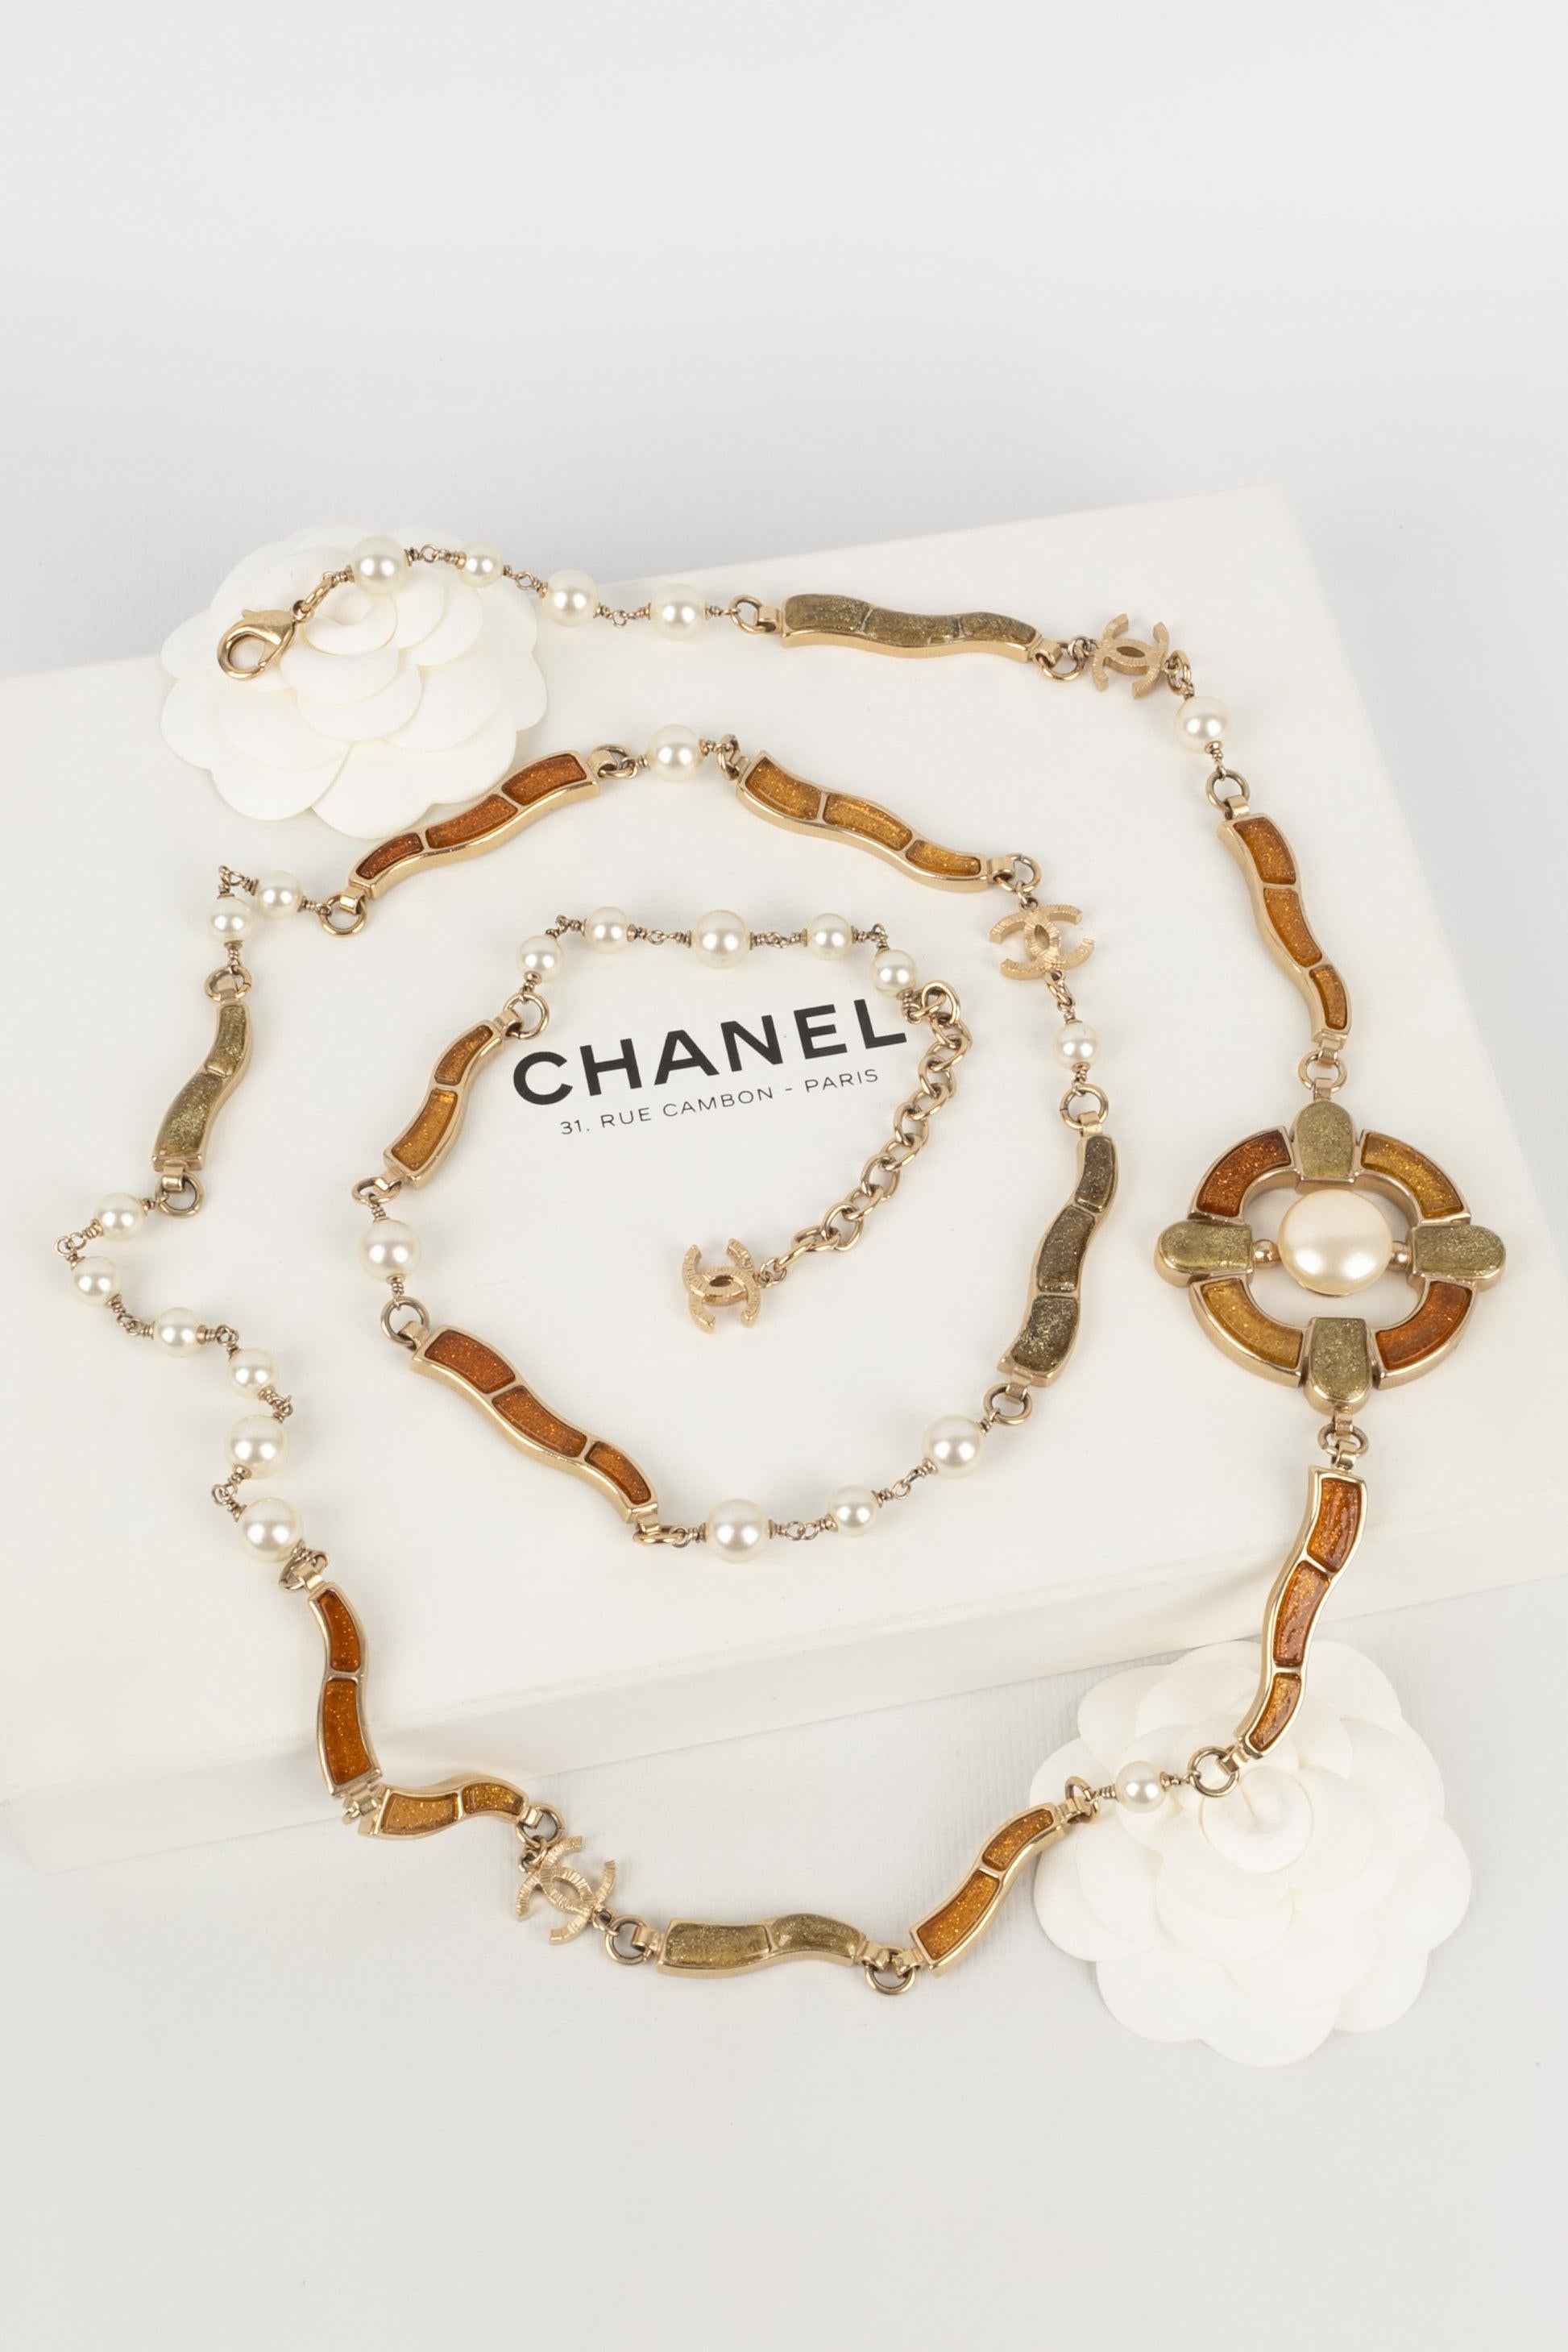 Chanel Golden Metal Long Necklace, 2007 For Sale 7